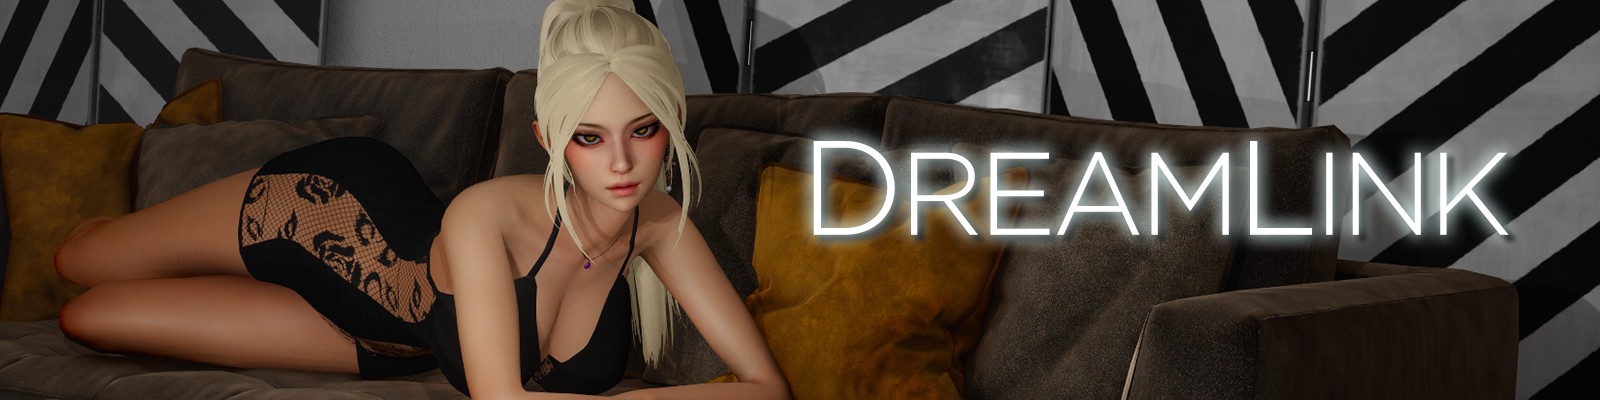 Dream Link Adult Game Android Apk Download (6)